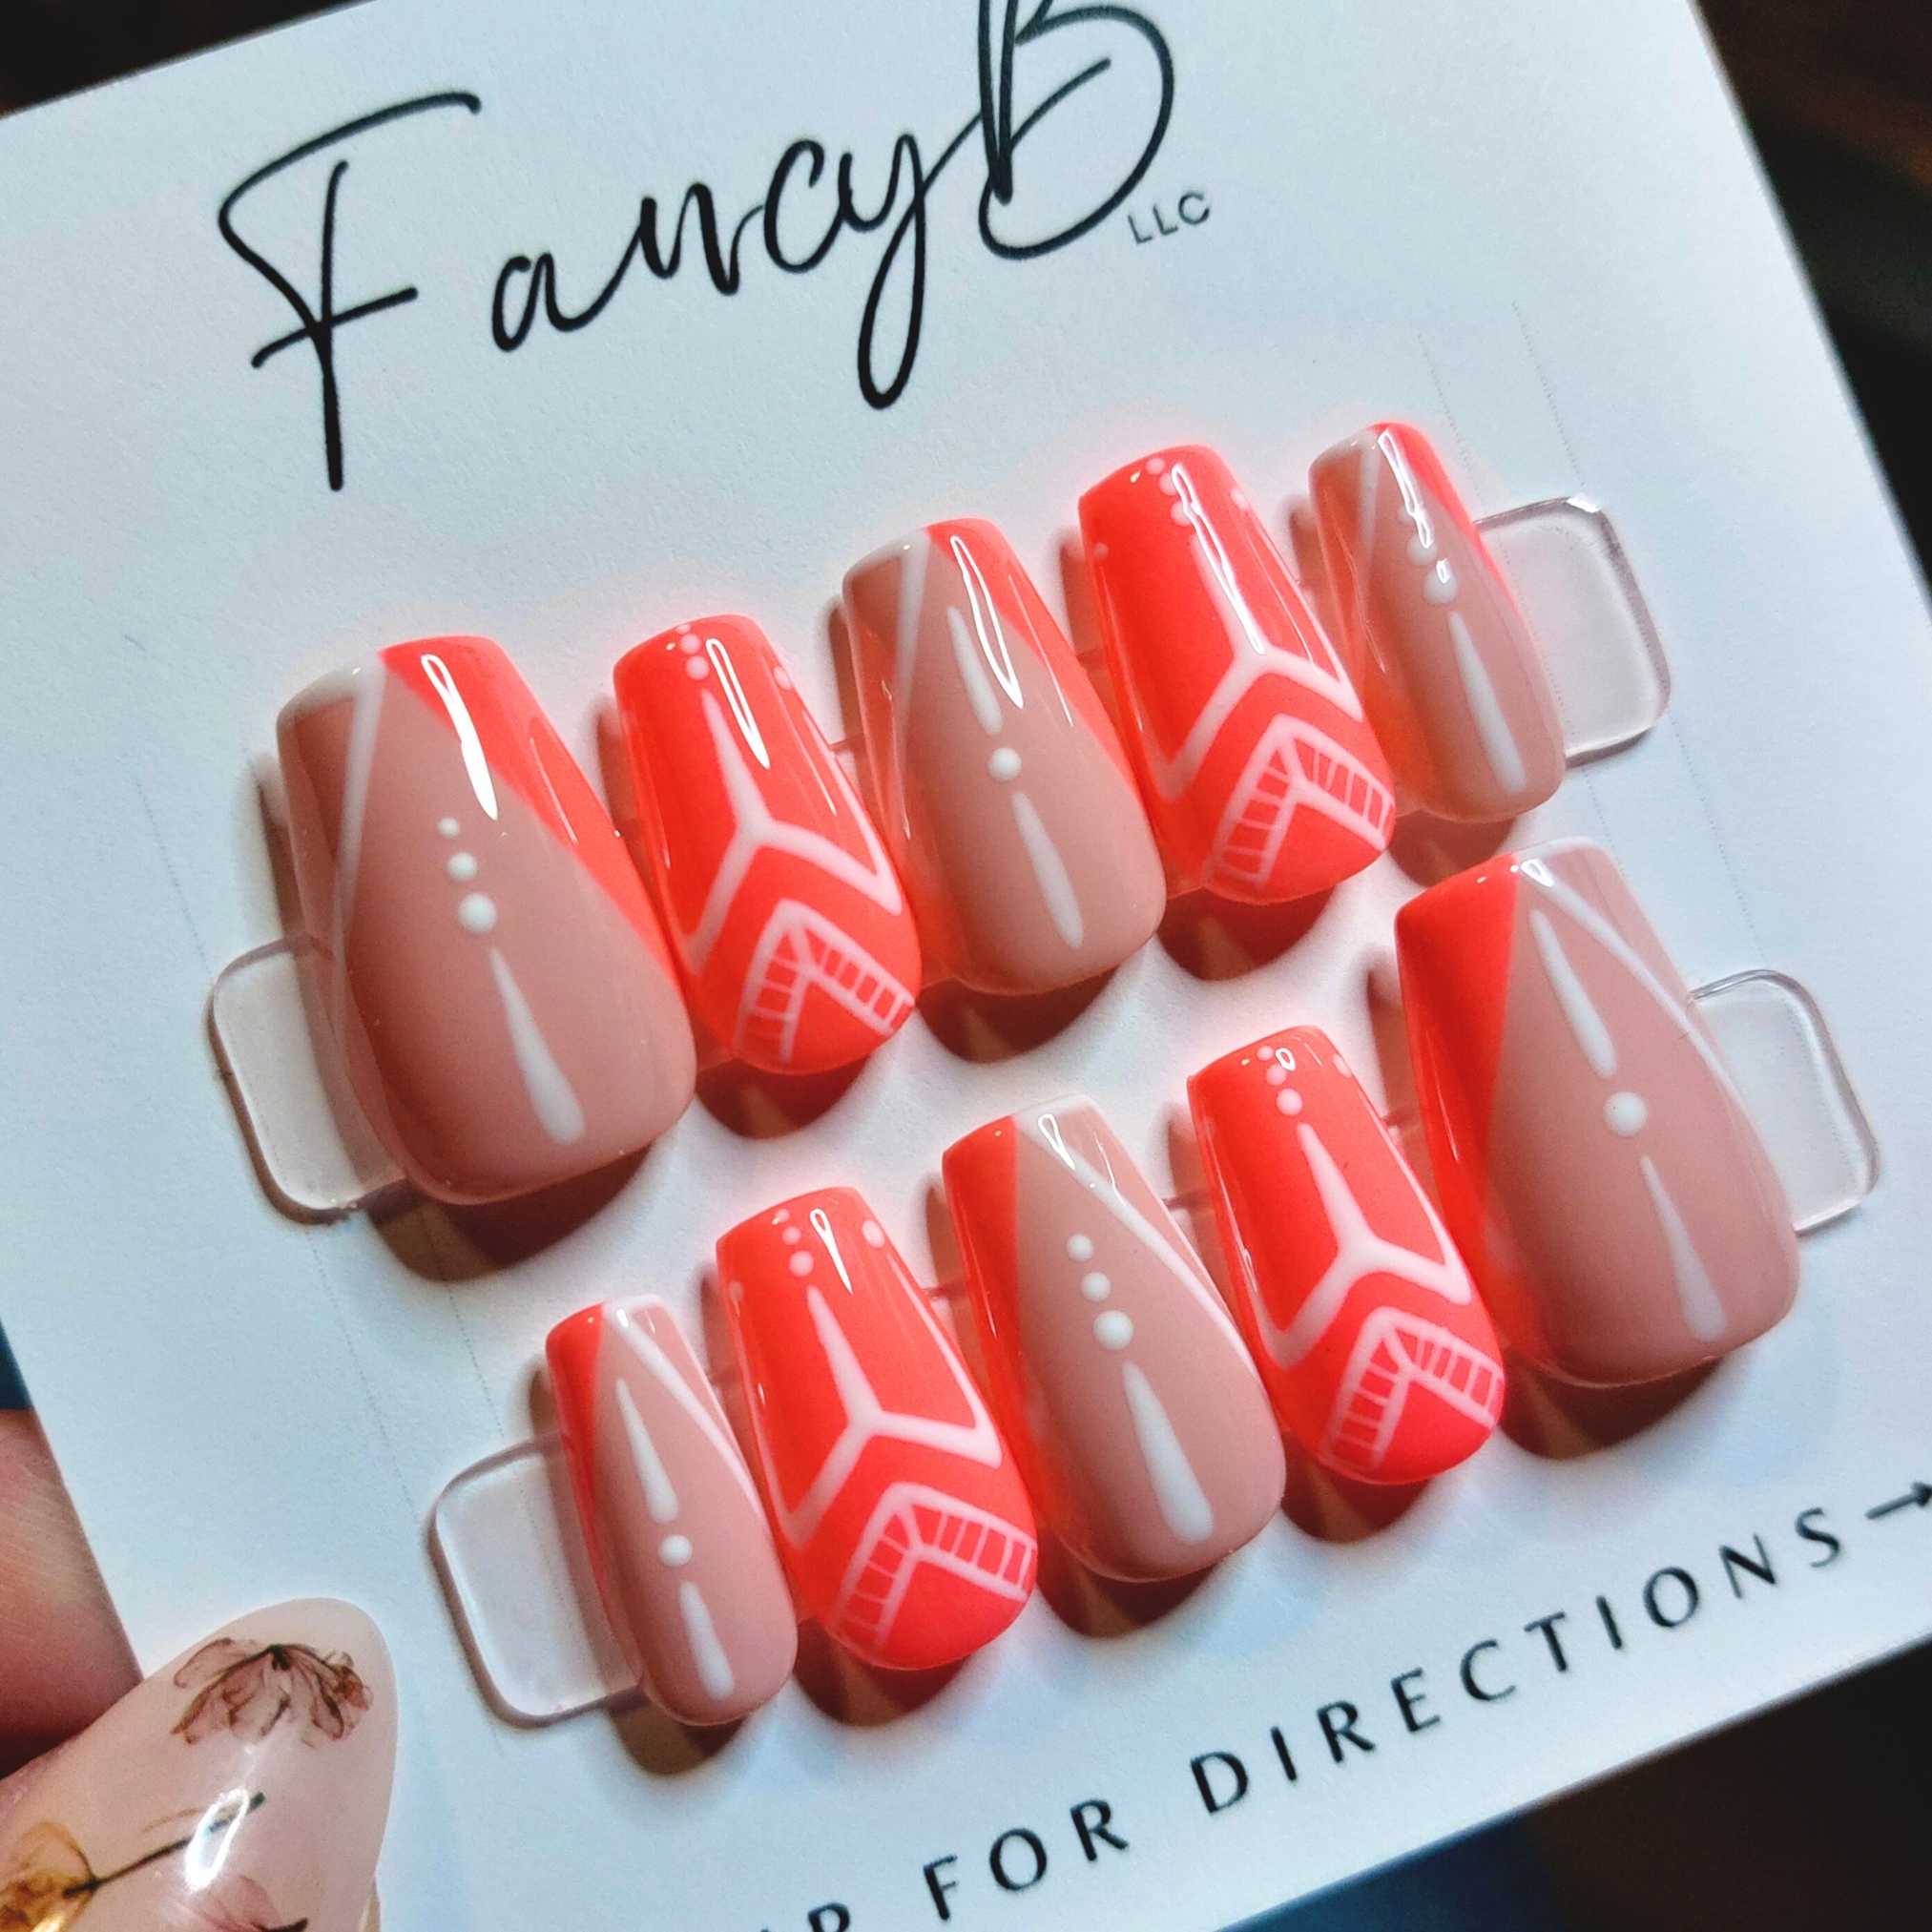 Neon coral tribal nails, fancyb custom press on nails with neon pink coral, nude french nails and tribal nails with dots and line designs, short coffin nails.